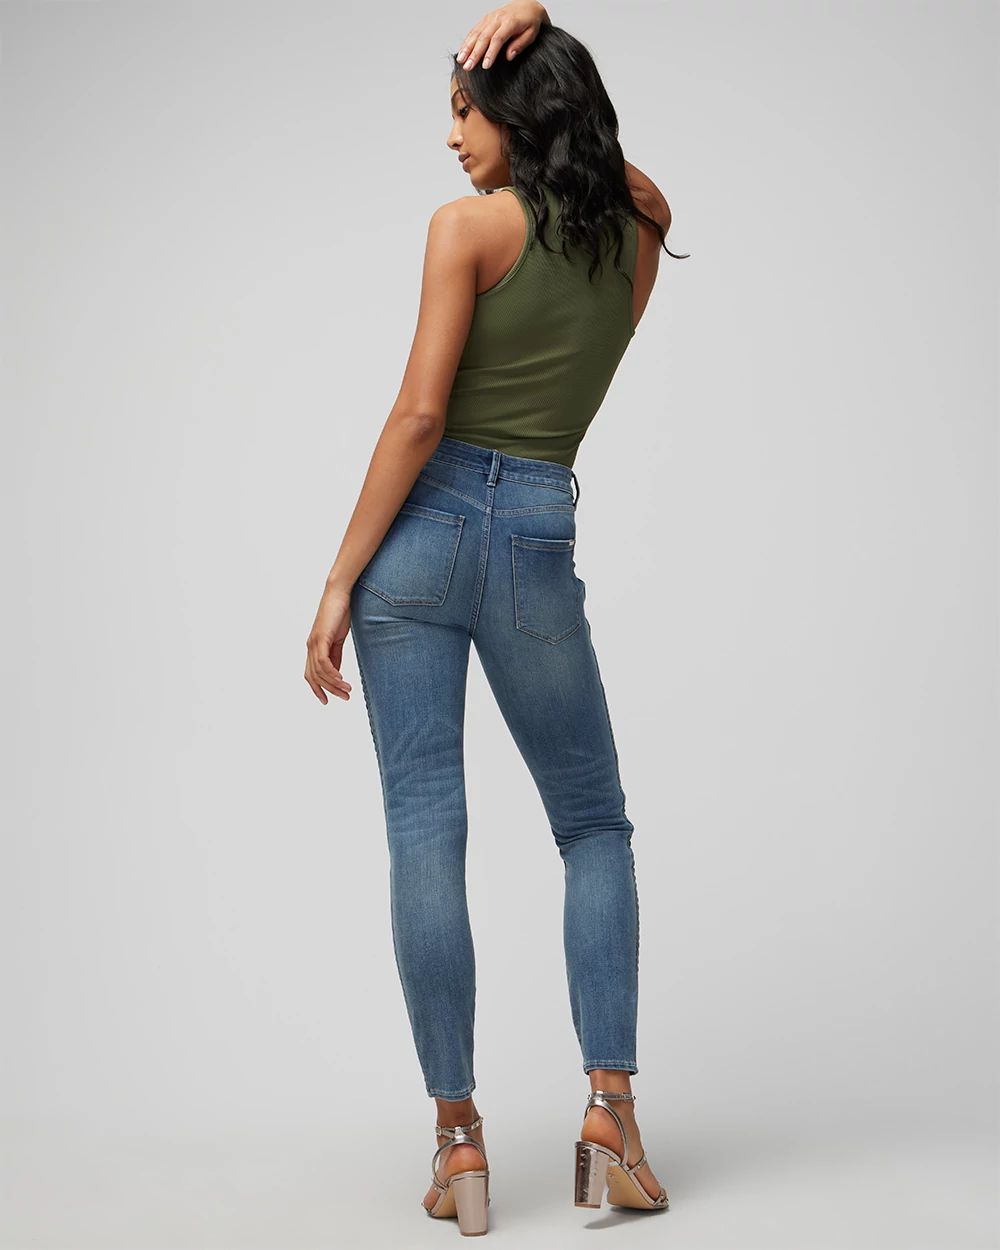 High Rise Sculpt Pleated Skinny Jeans click to view larger image.